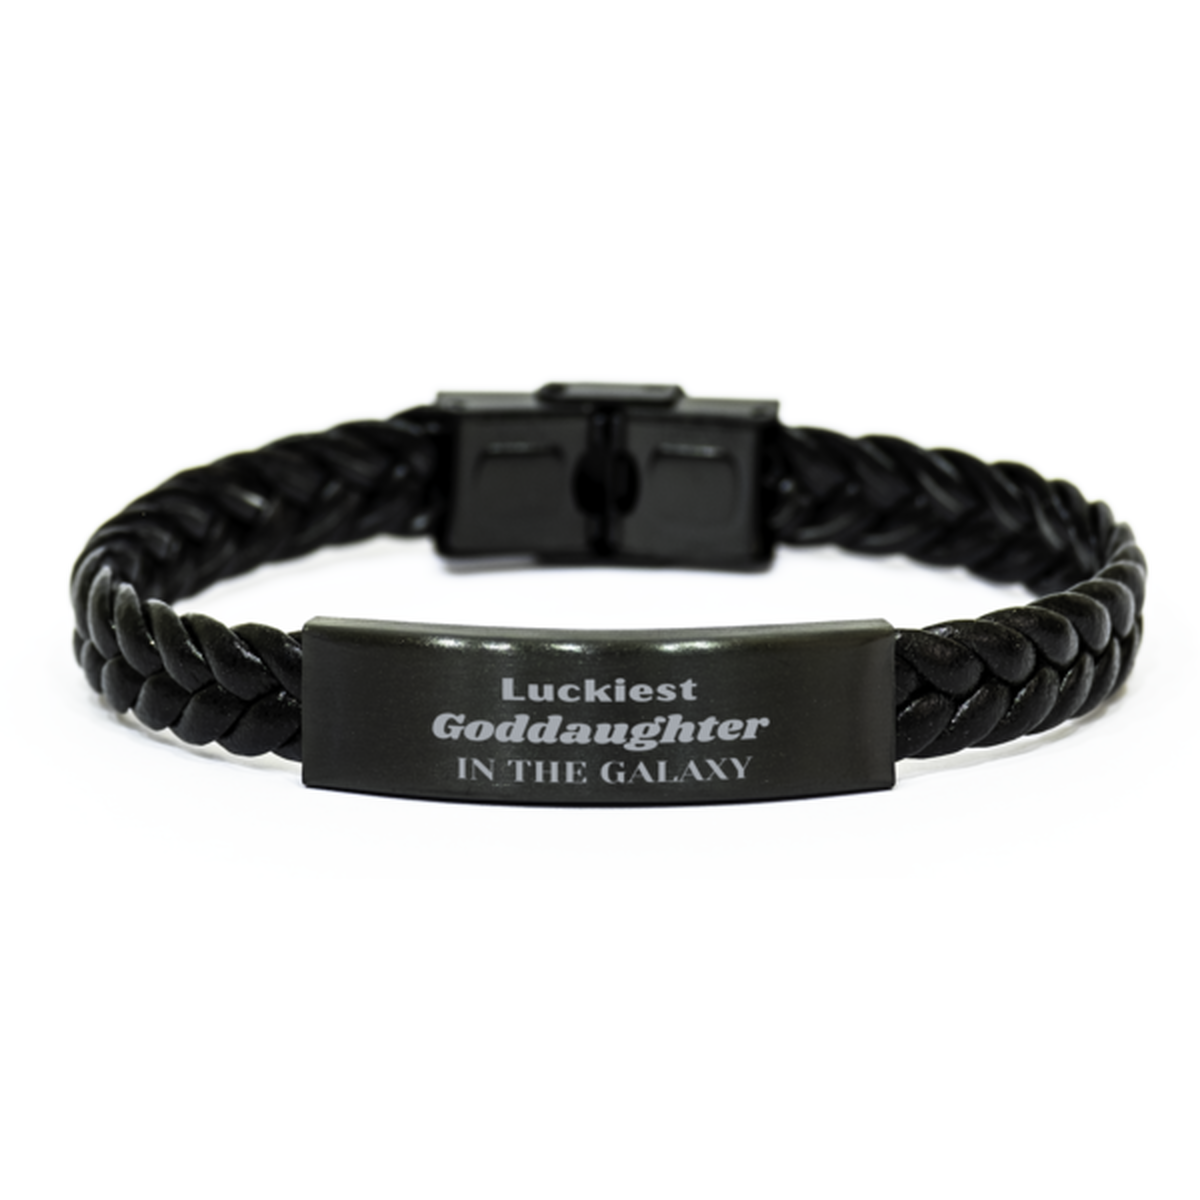 Luckiest Goddaughter in the Galaxy, To My Goddaughter Engraved Gifts, Christmas Goddaughter Braided Leather Bracelet Gifts, X-mas Birthday Unique Gifts For Goddaughter Men Women